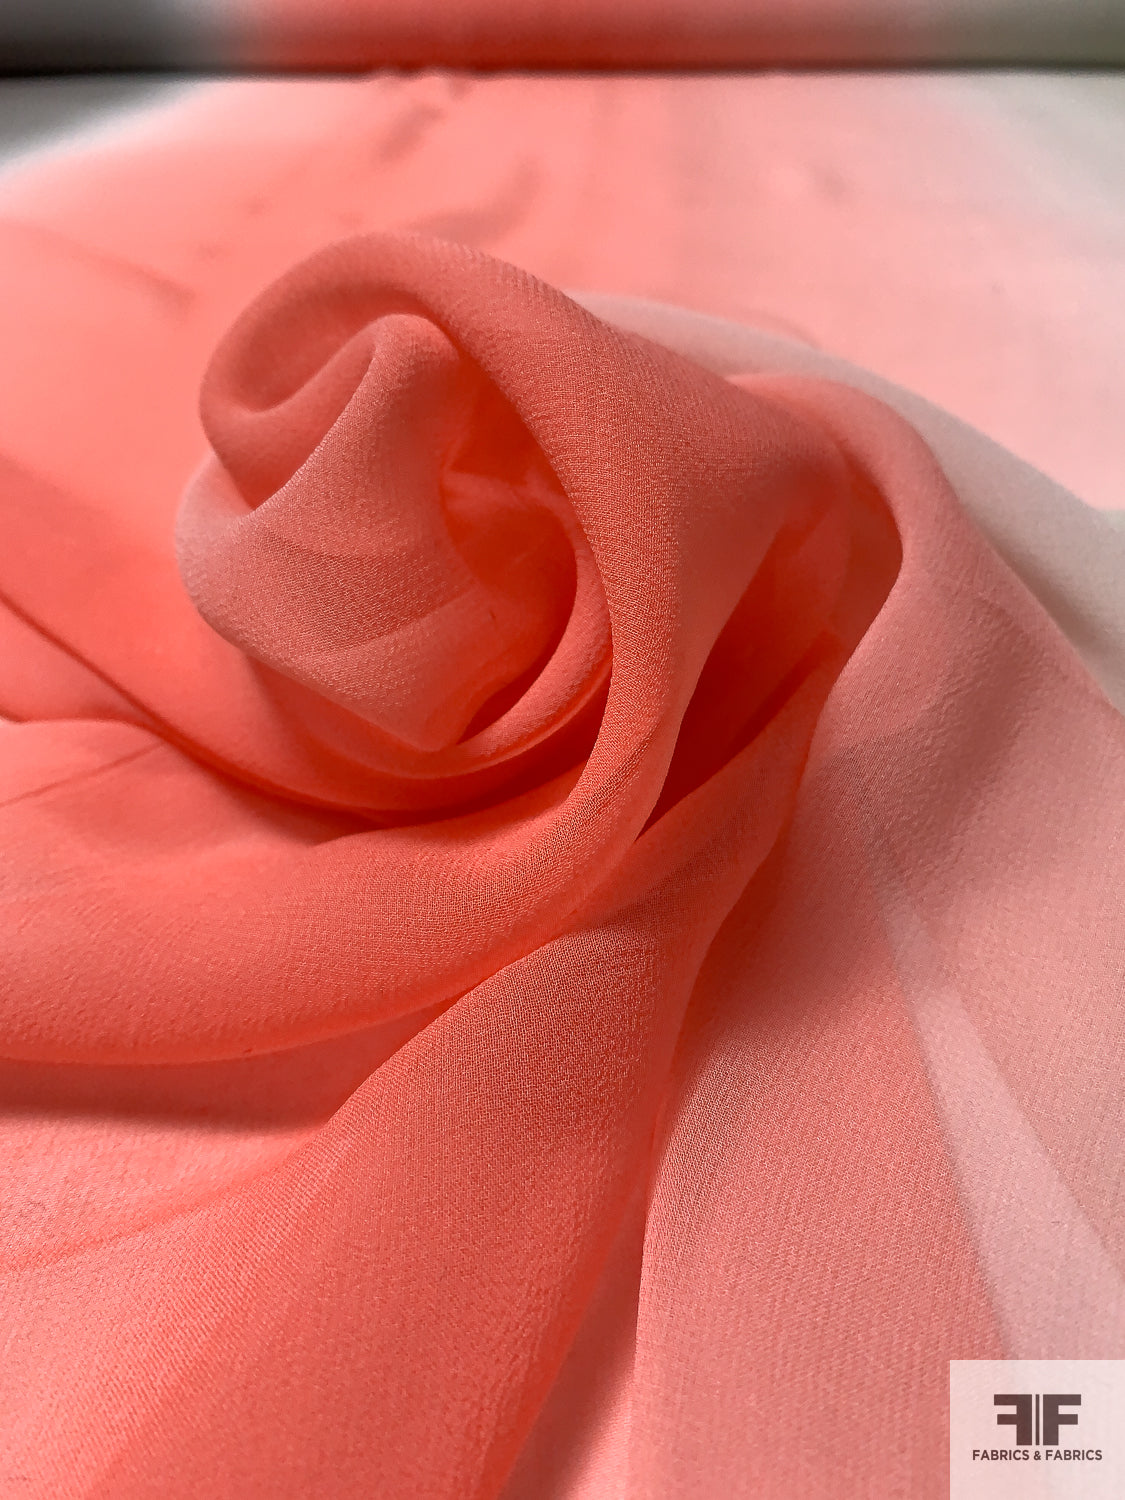 Ombré Printed Silk Chiffon - Lightest Sage / Pink-Coral / Taupe Brown